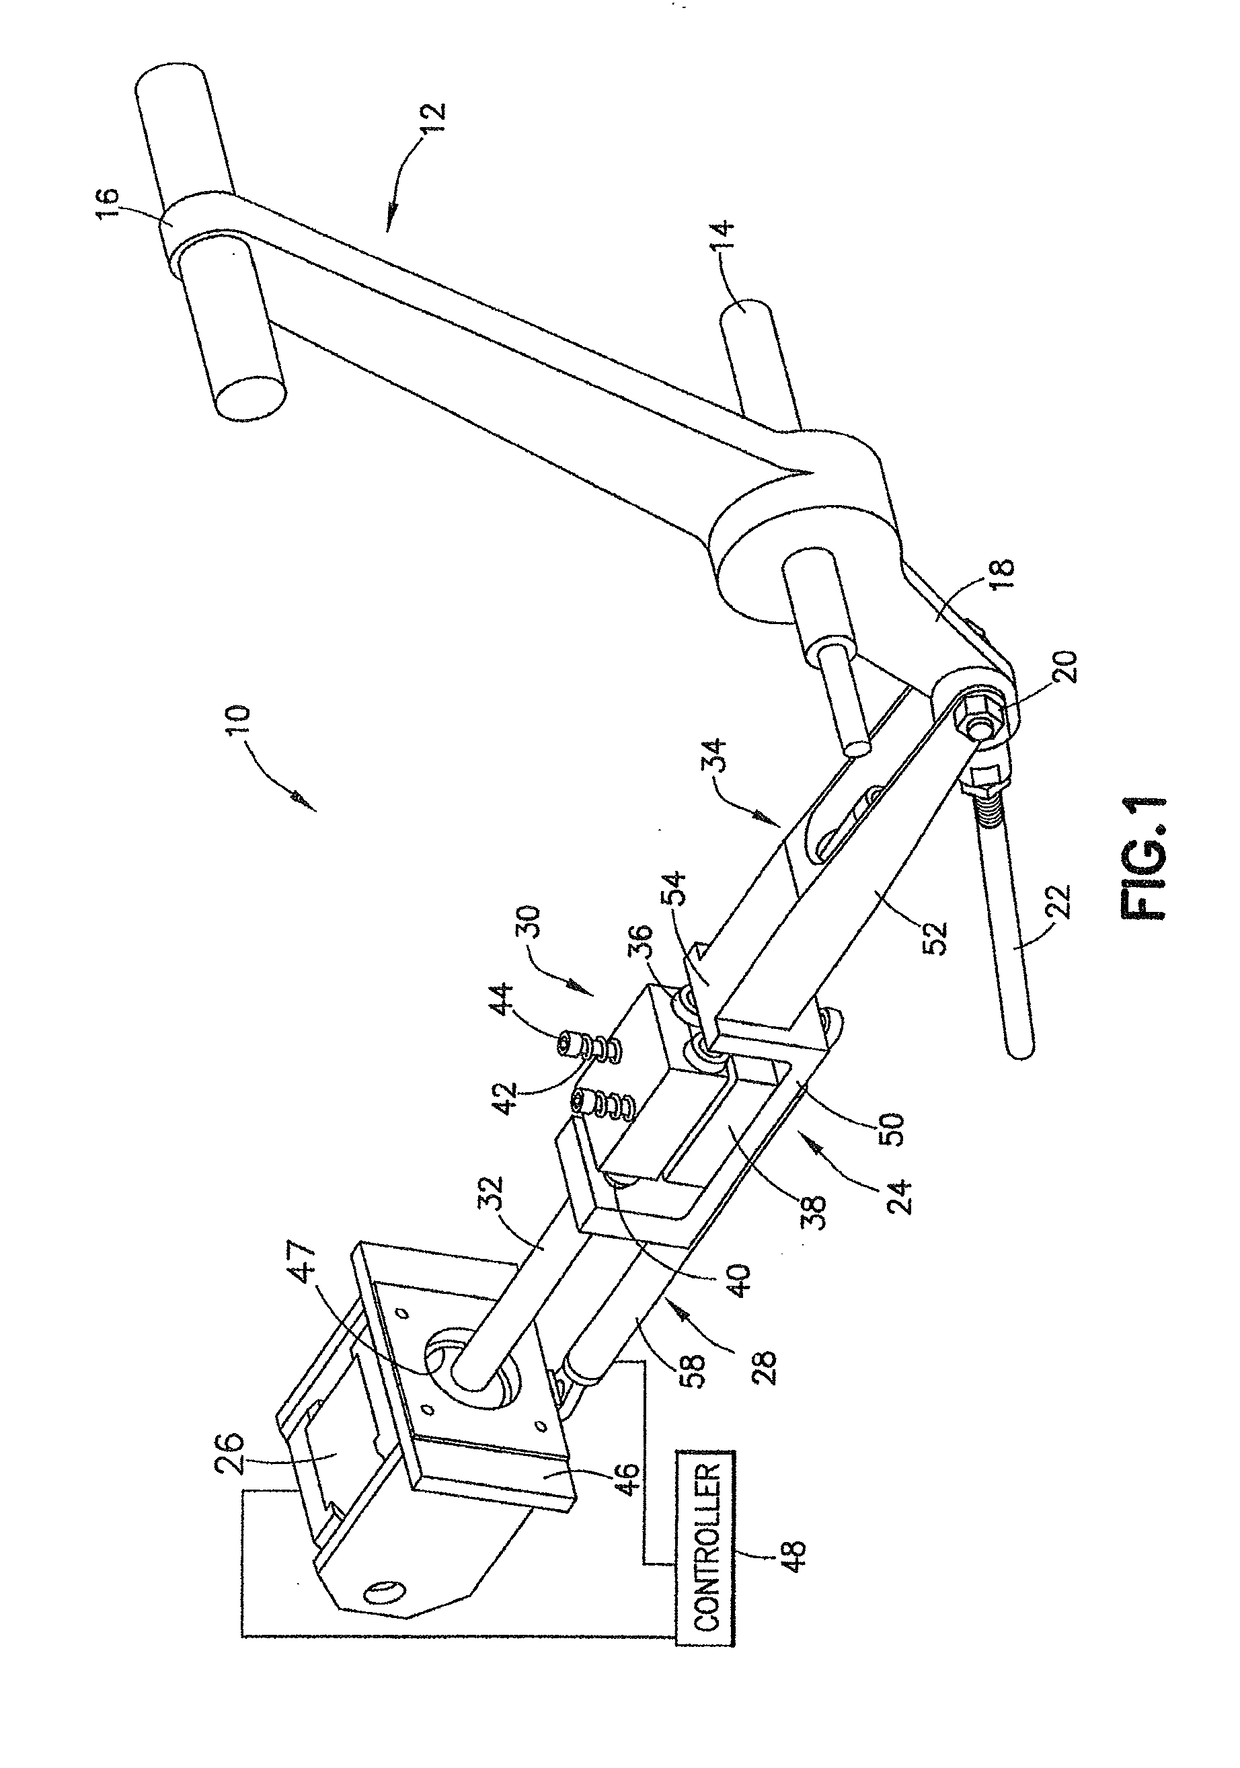 Precision Operator for an Aircraft Autothrottle or Autopilot System with Engine Performance Adjust